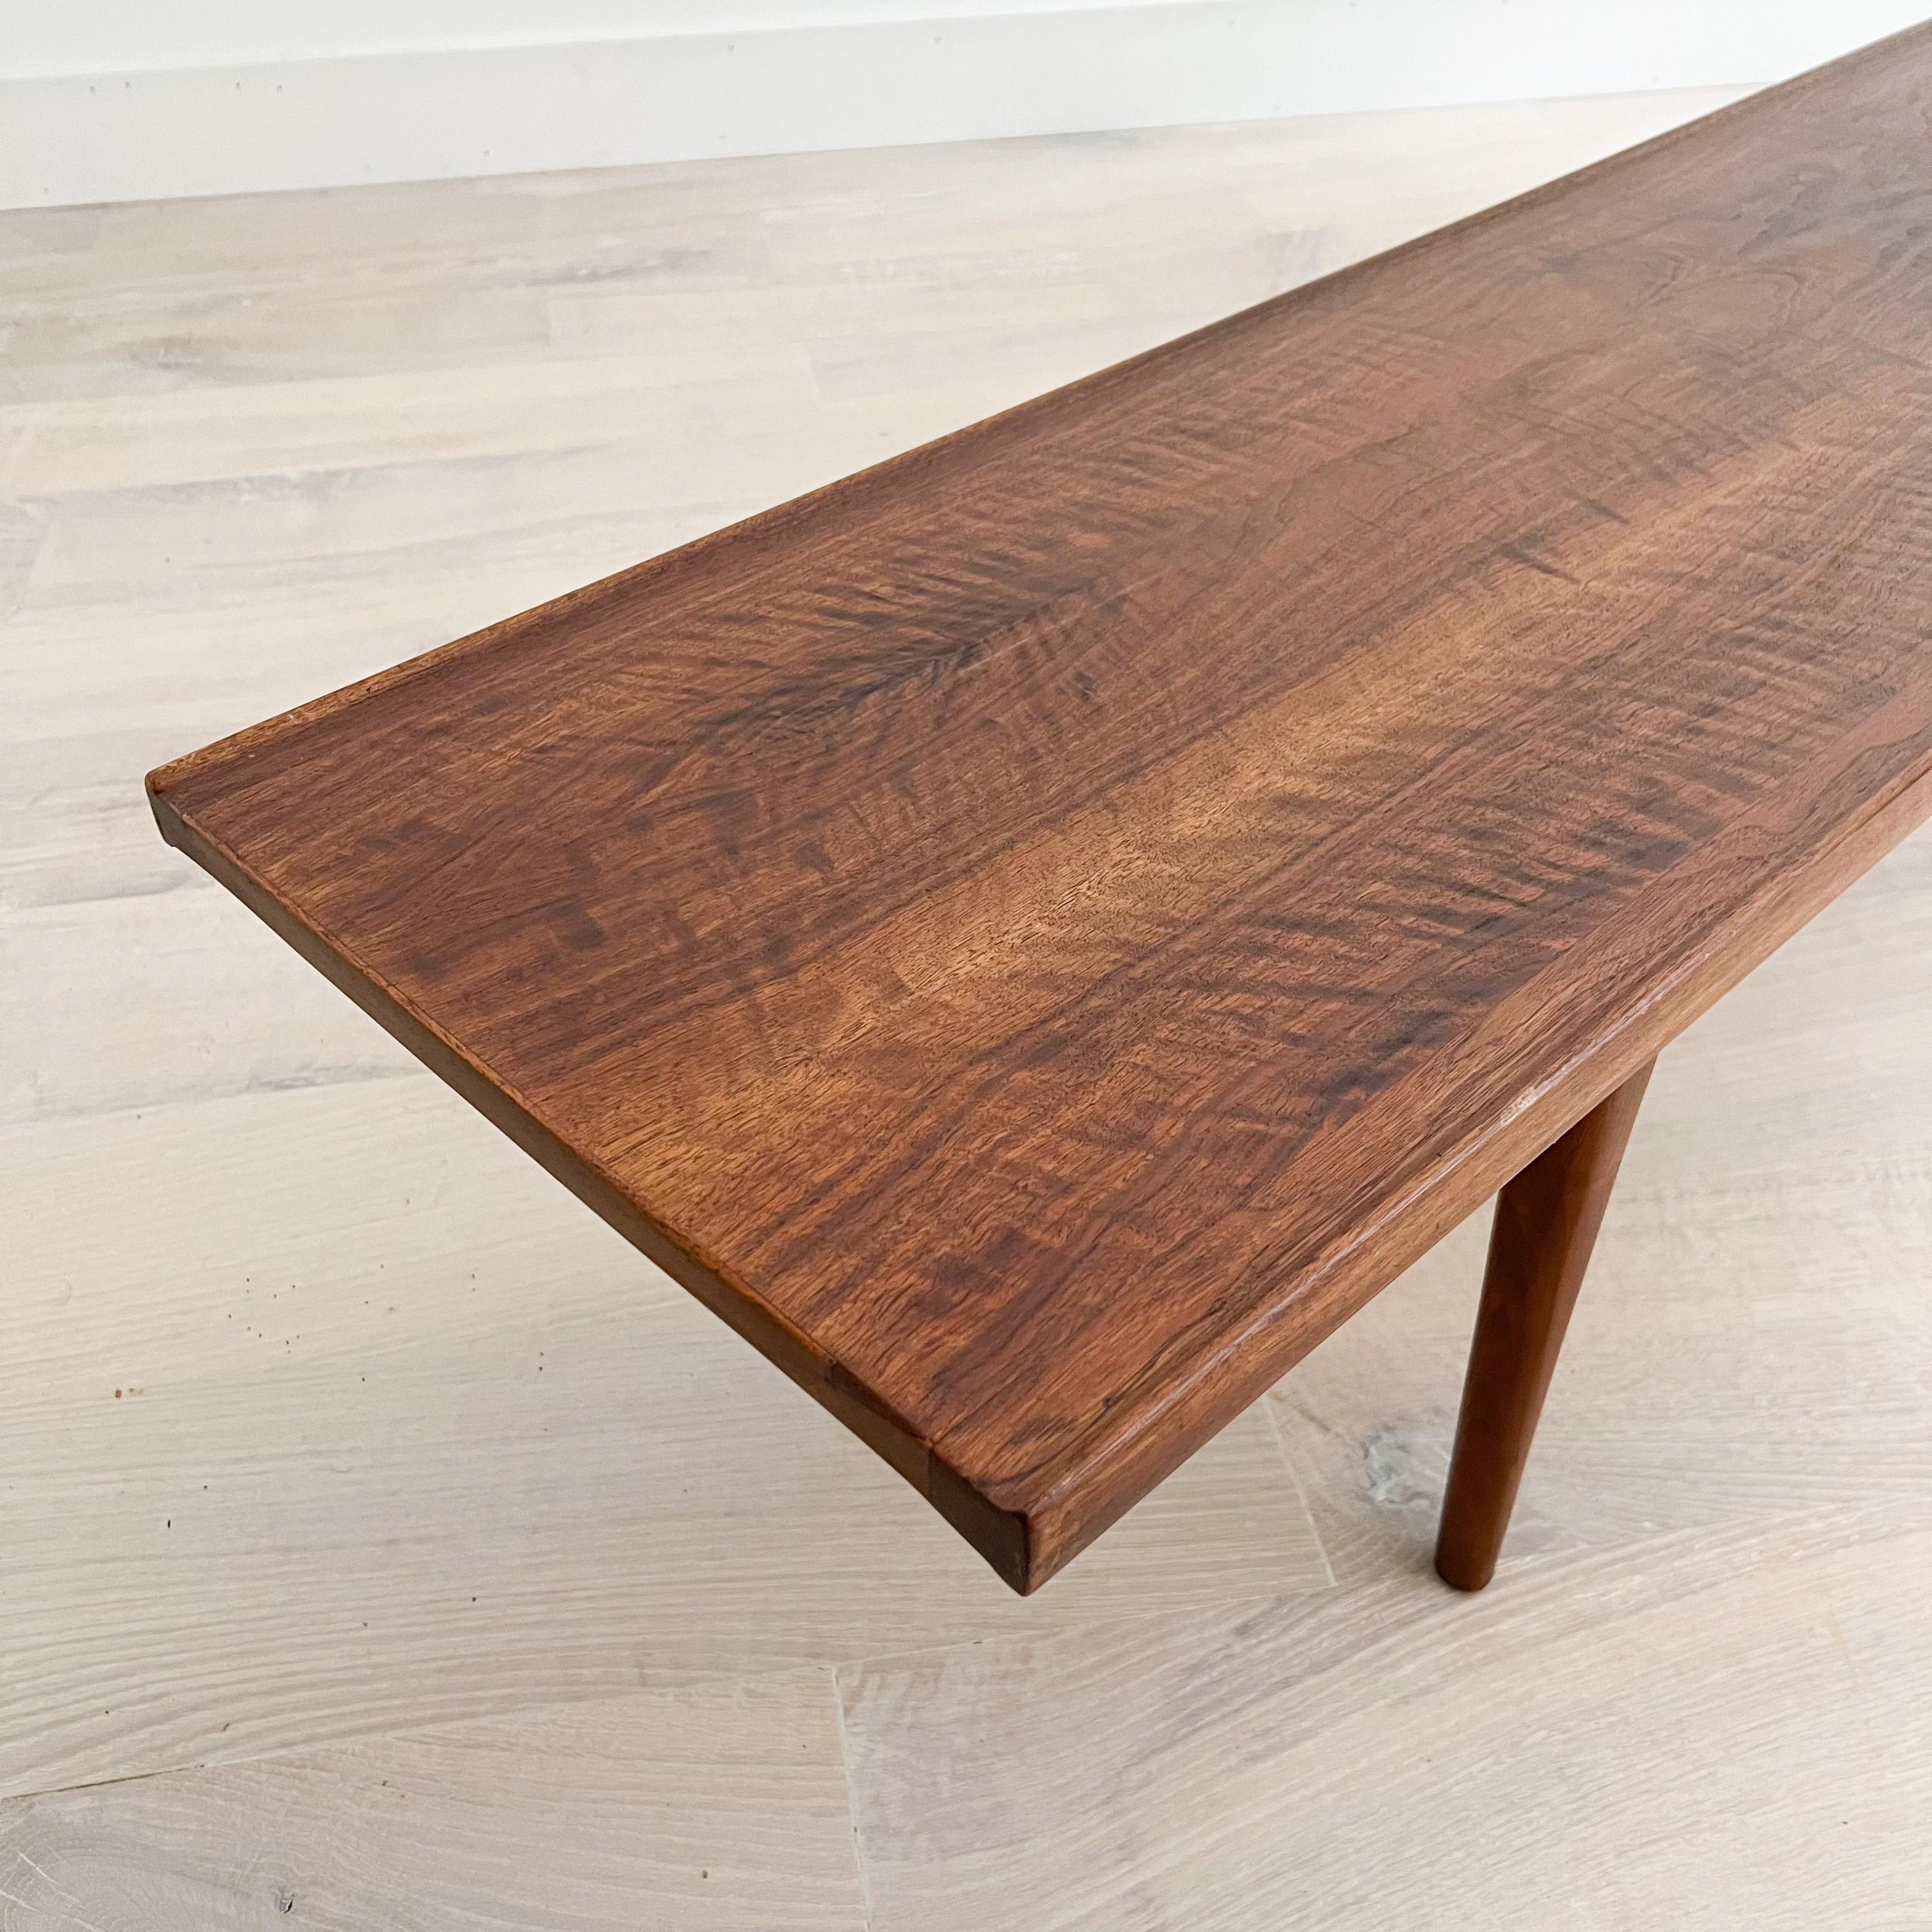 Rare Mid-Century Modern long and low walnut coffee table by Kipp Stewart for the Drexel Declaration line. Beautiful wood grain. Some light scuffing/scratching from age appropriate wear. Stamped Drexel underneath.